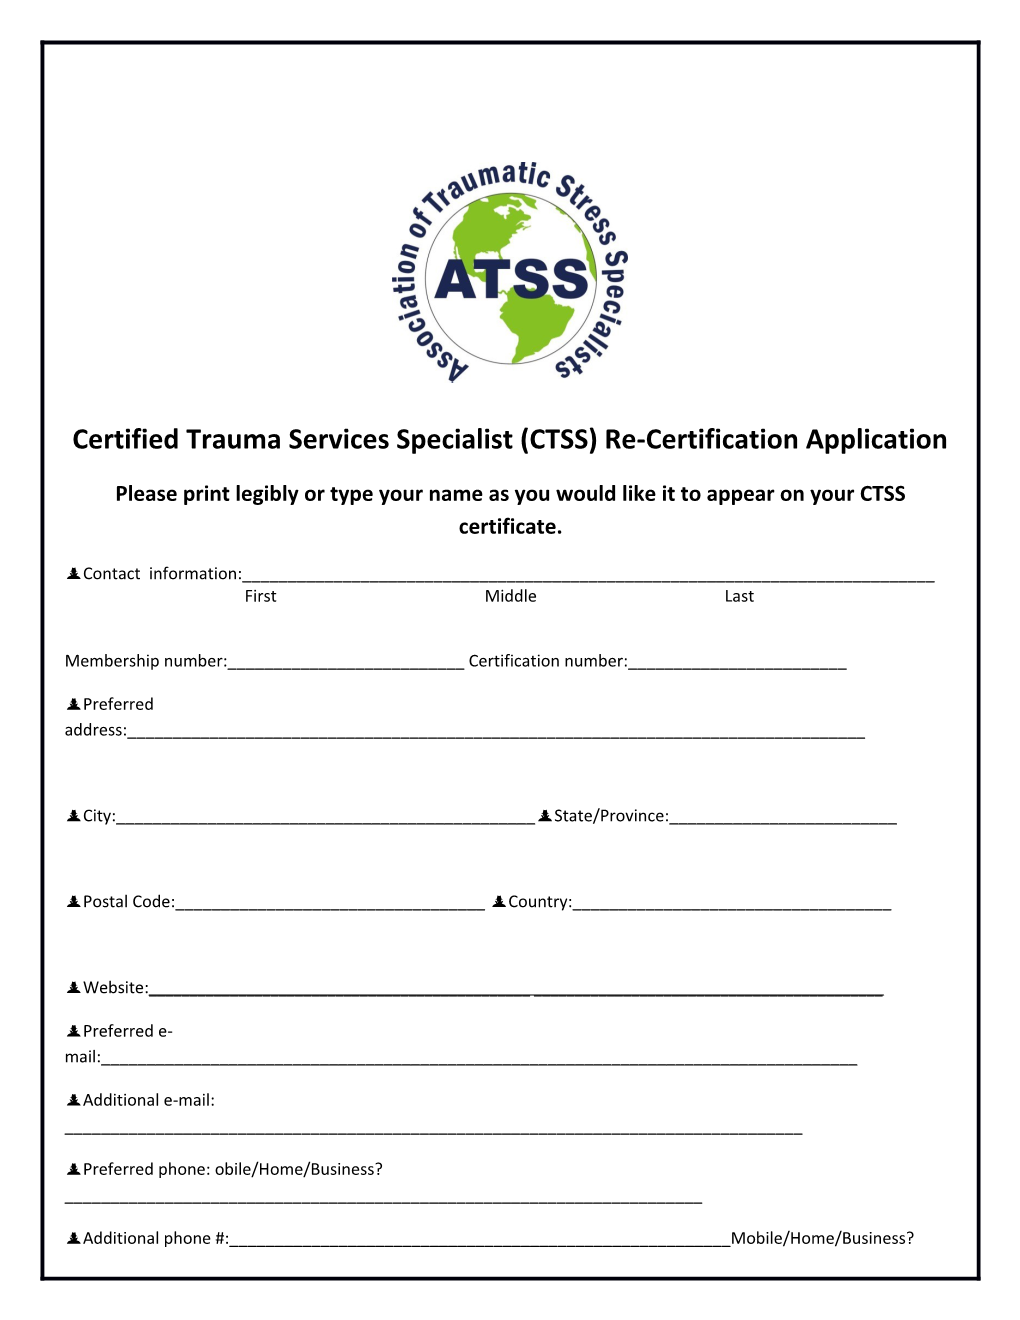 Certified Trauma Services Specialist (CTSS) Re-Certification Application